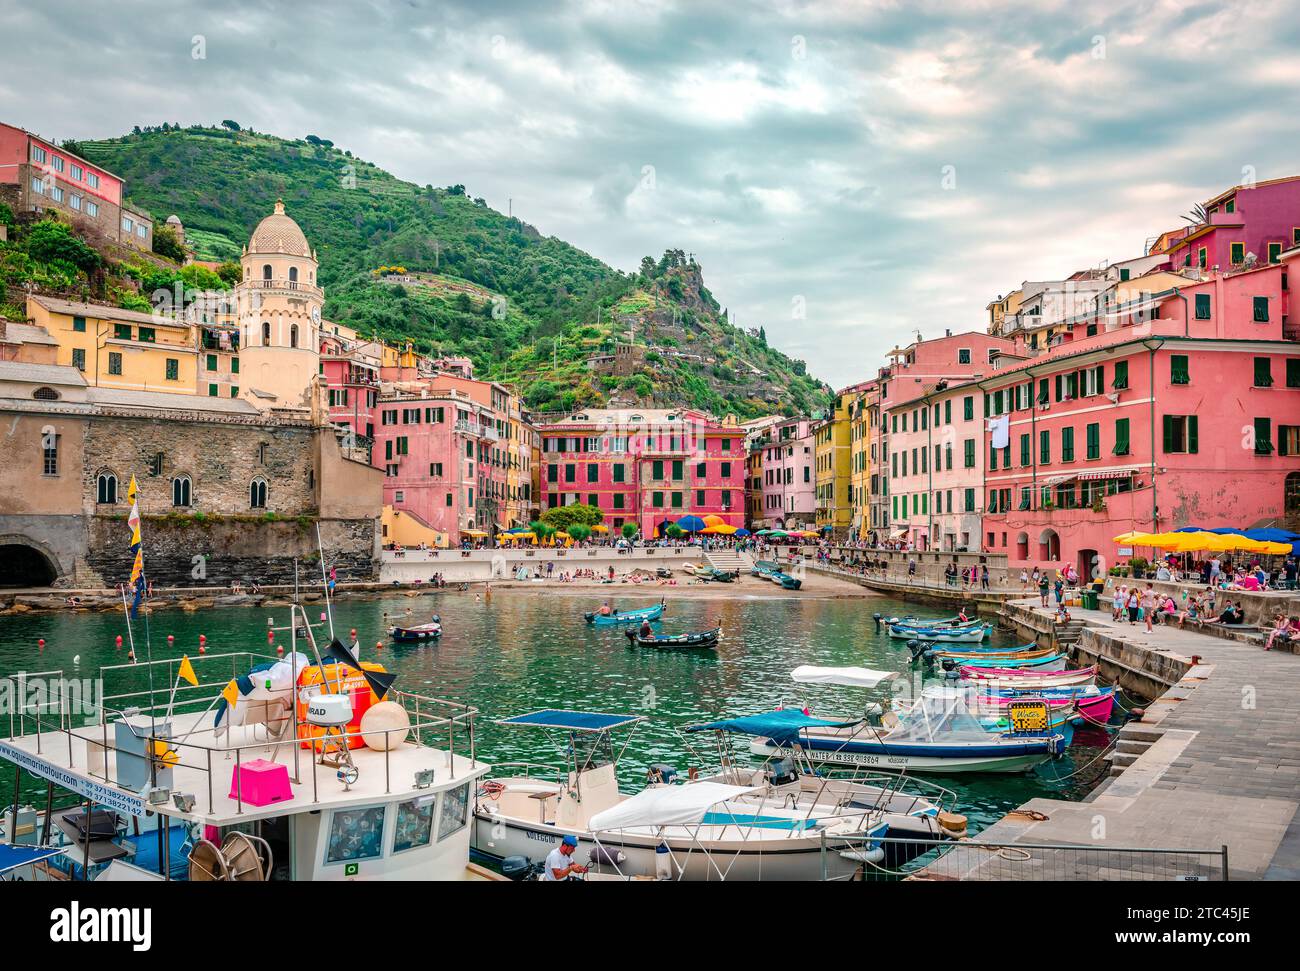 Vernazza, a true fishing village and one of the five towns that make up the Cinque Terre region on the Italian Riviera. La Spezia, Italy. Stock Photo